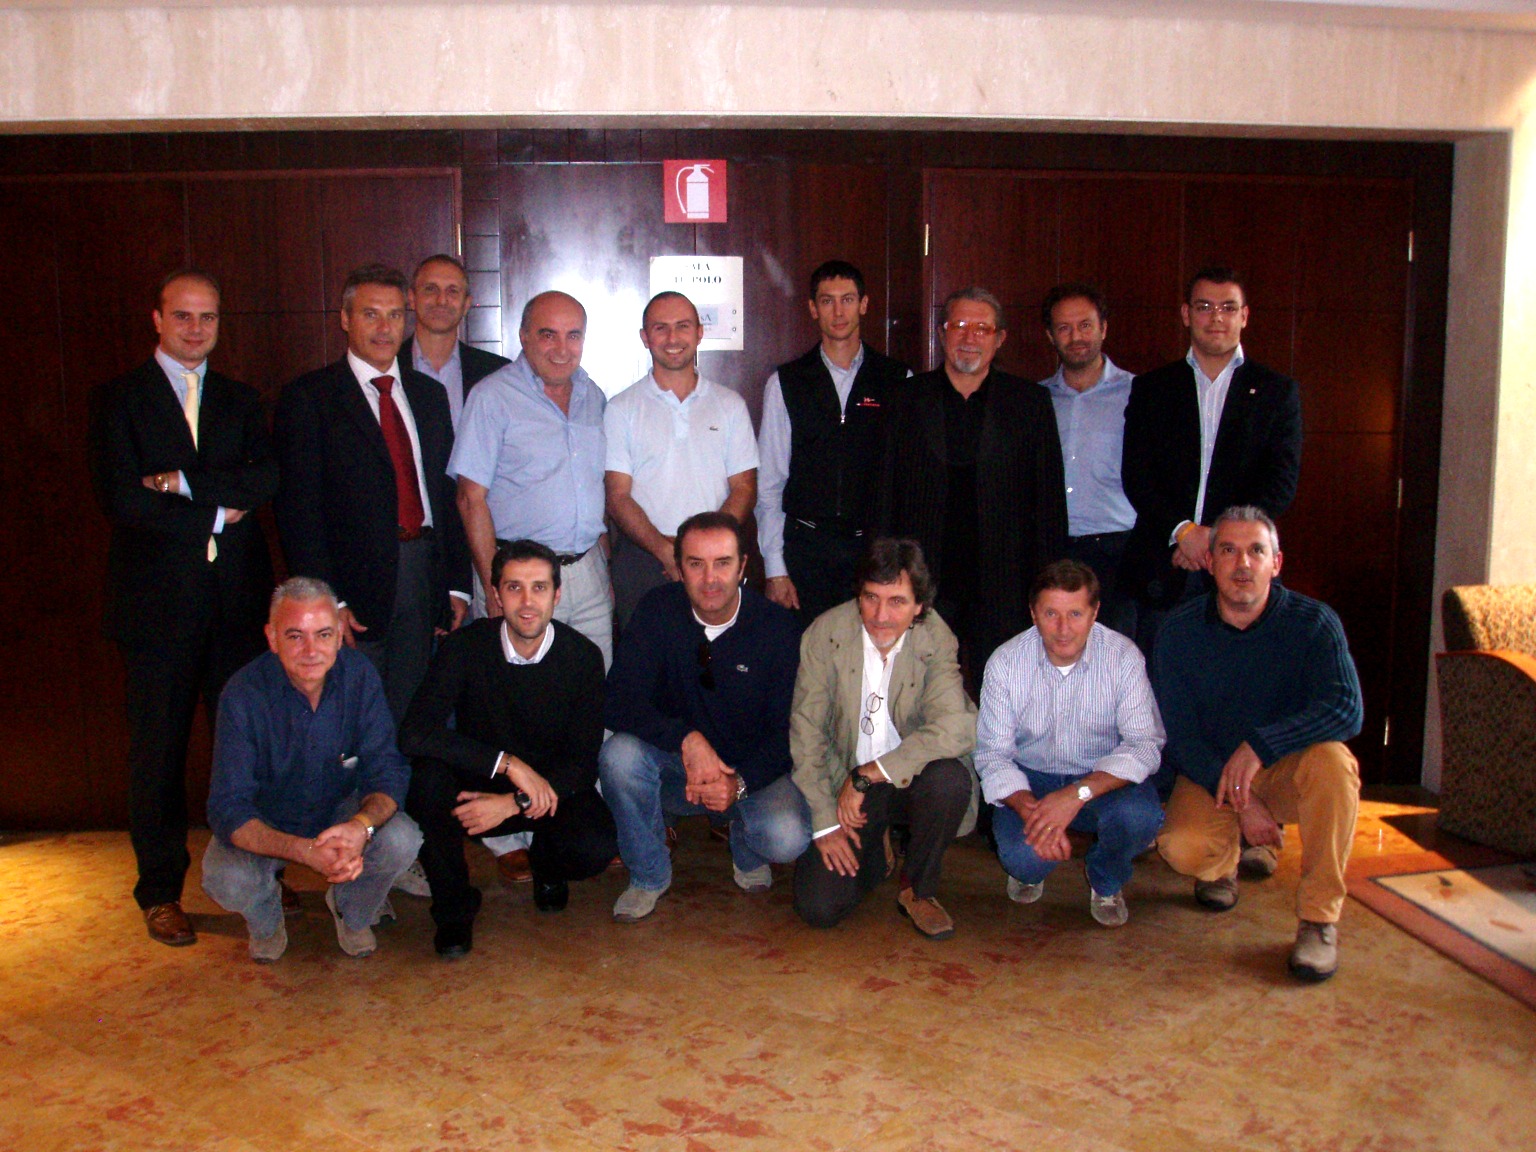 Participants of the first ASCS training course in Rome, Italy, in 2007